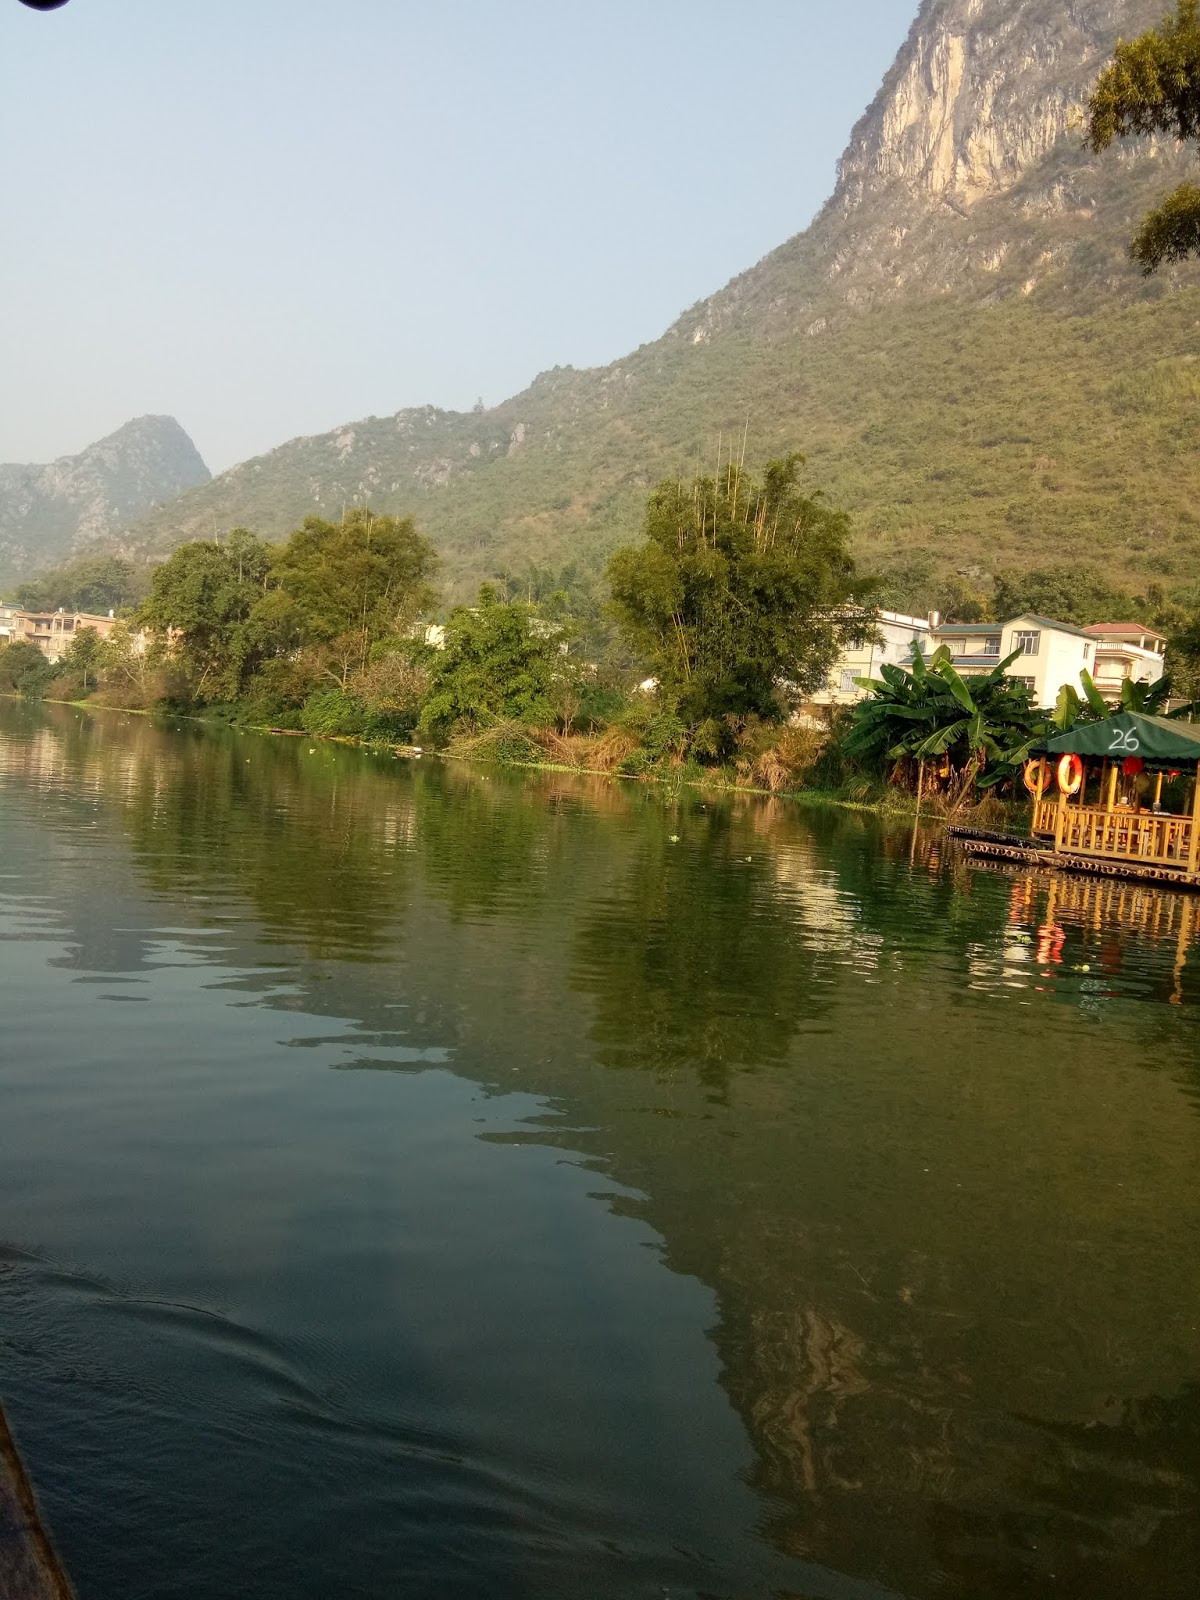 The Nature of Guilin